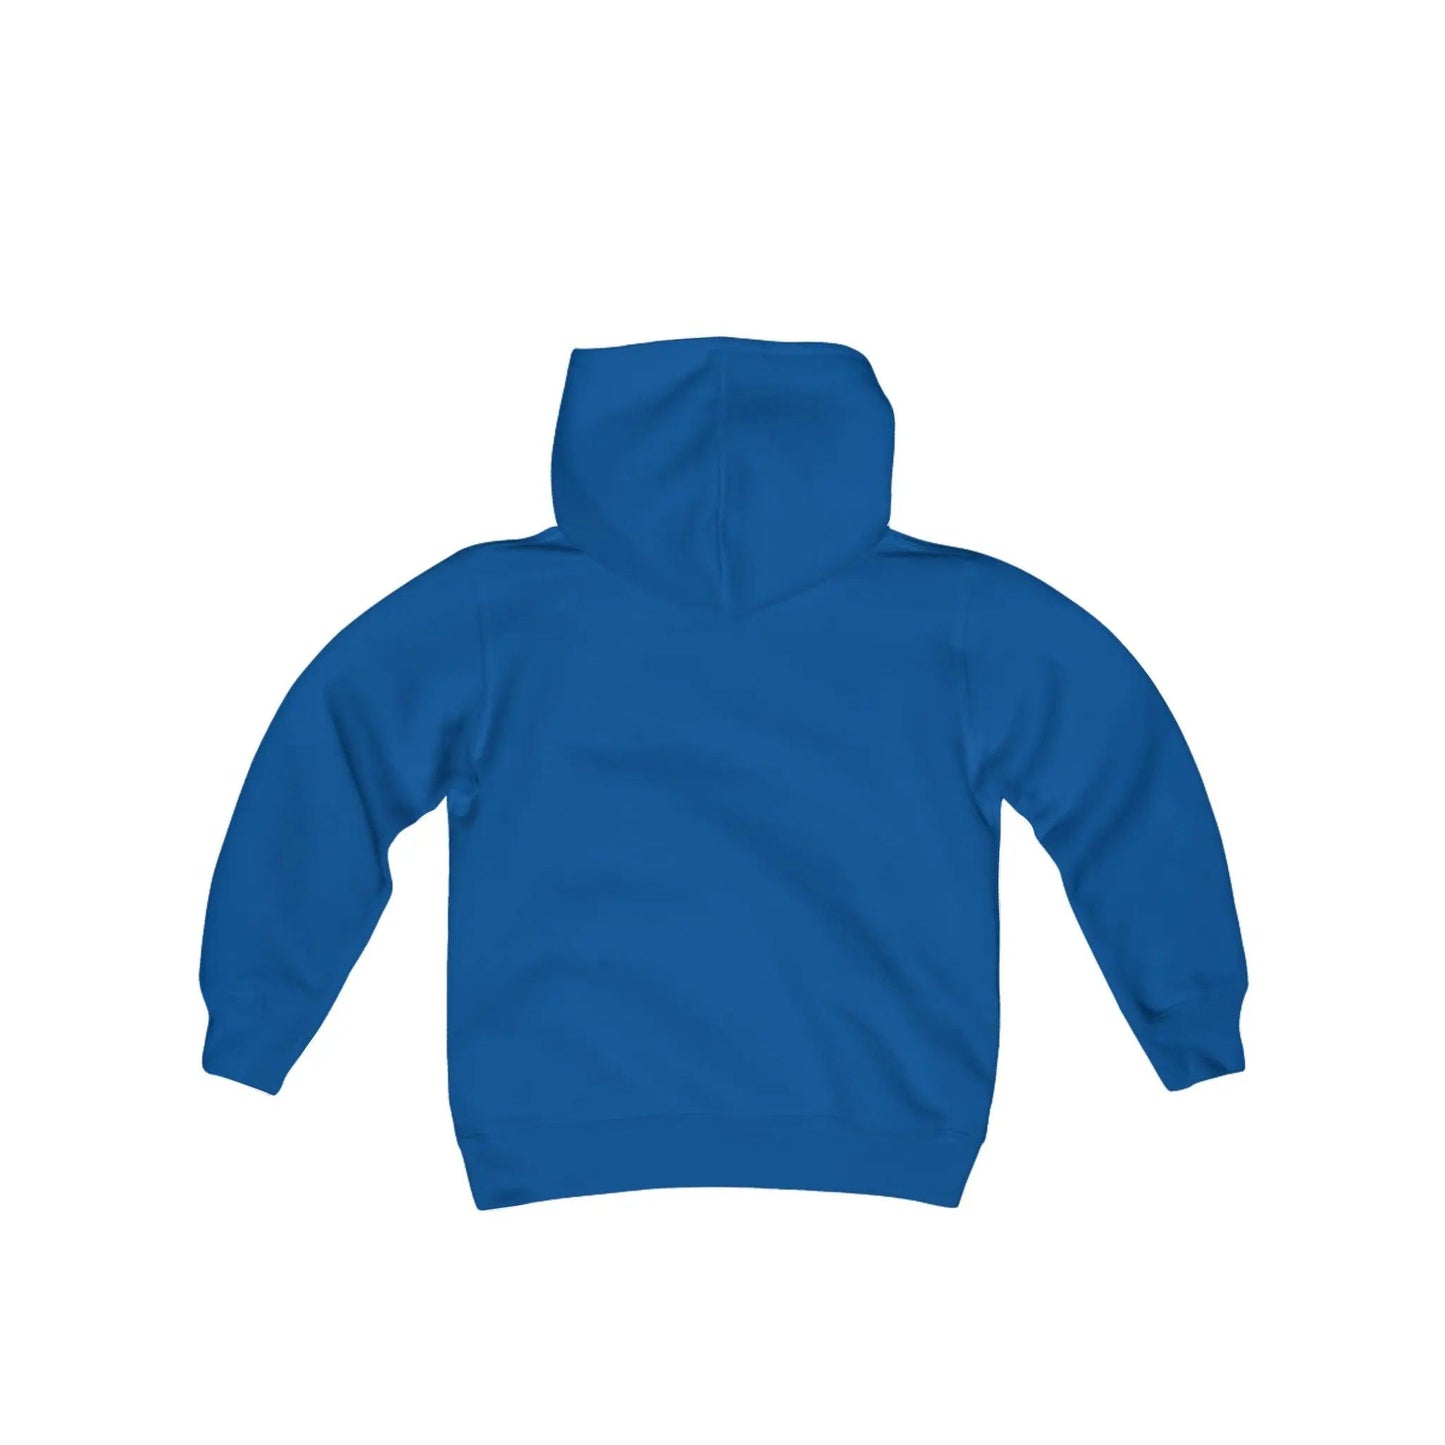 Youth Heavy Blend Hooded Sweatshirt Kids clothes